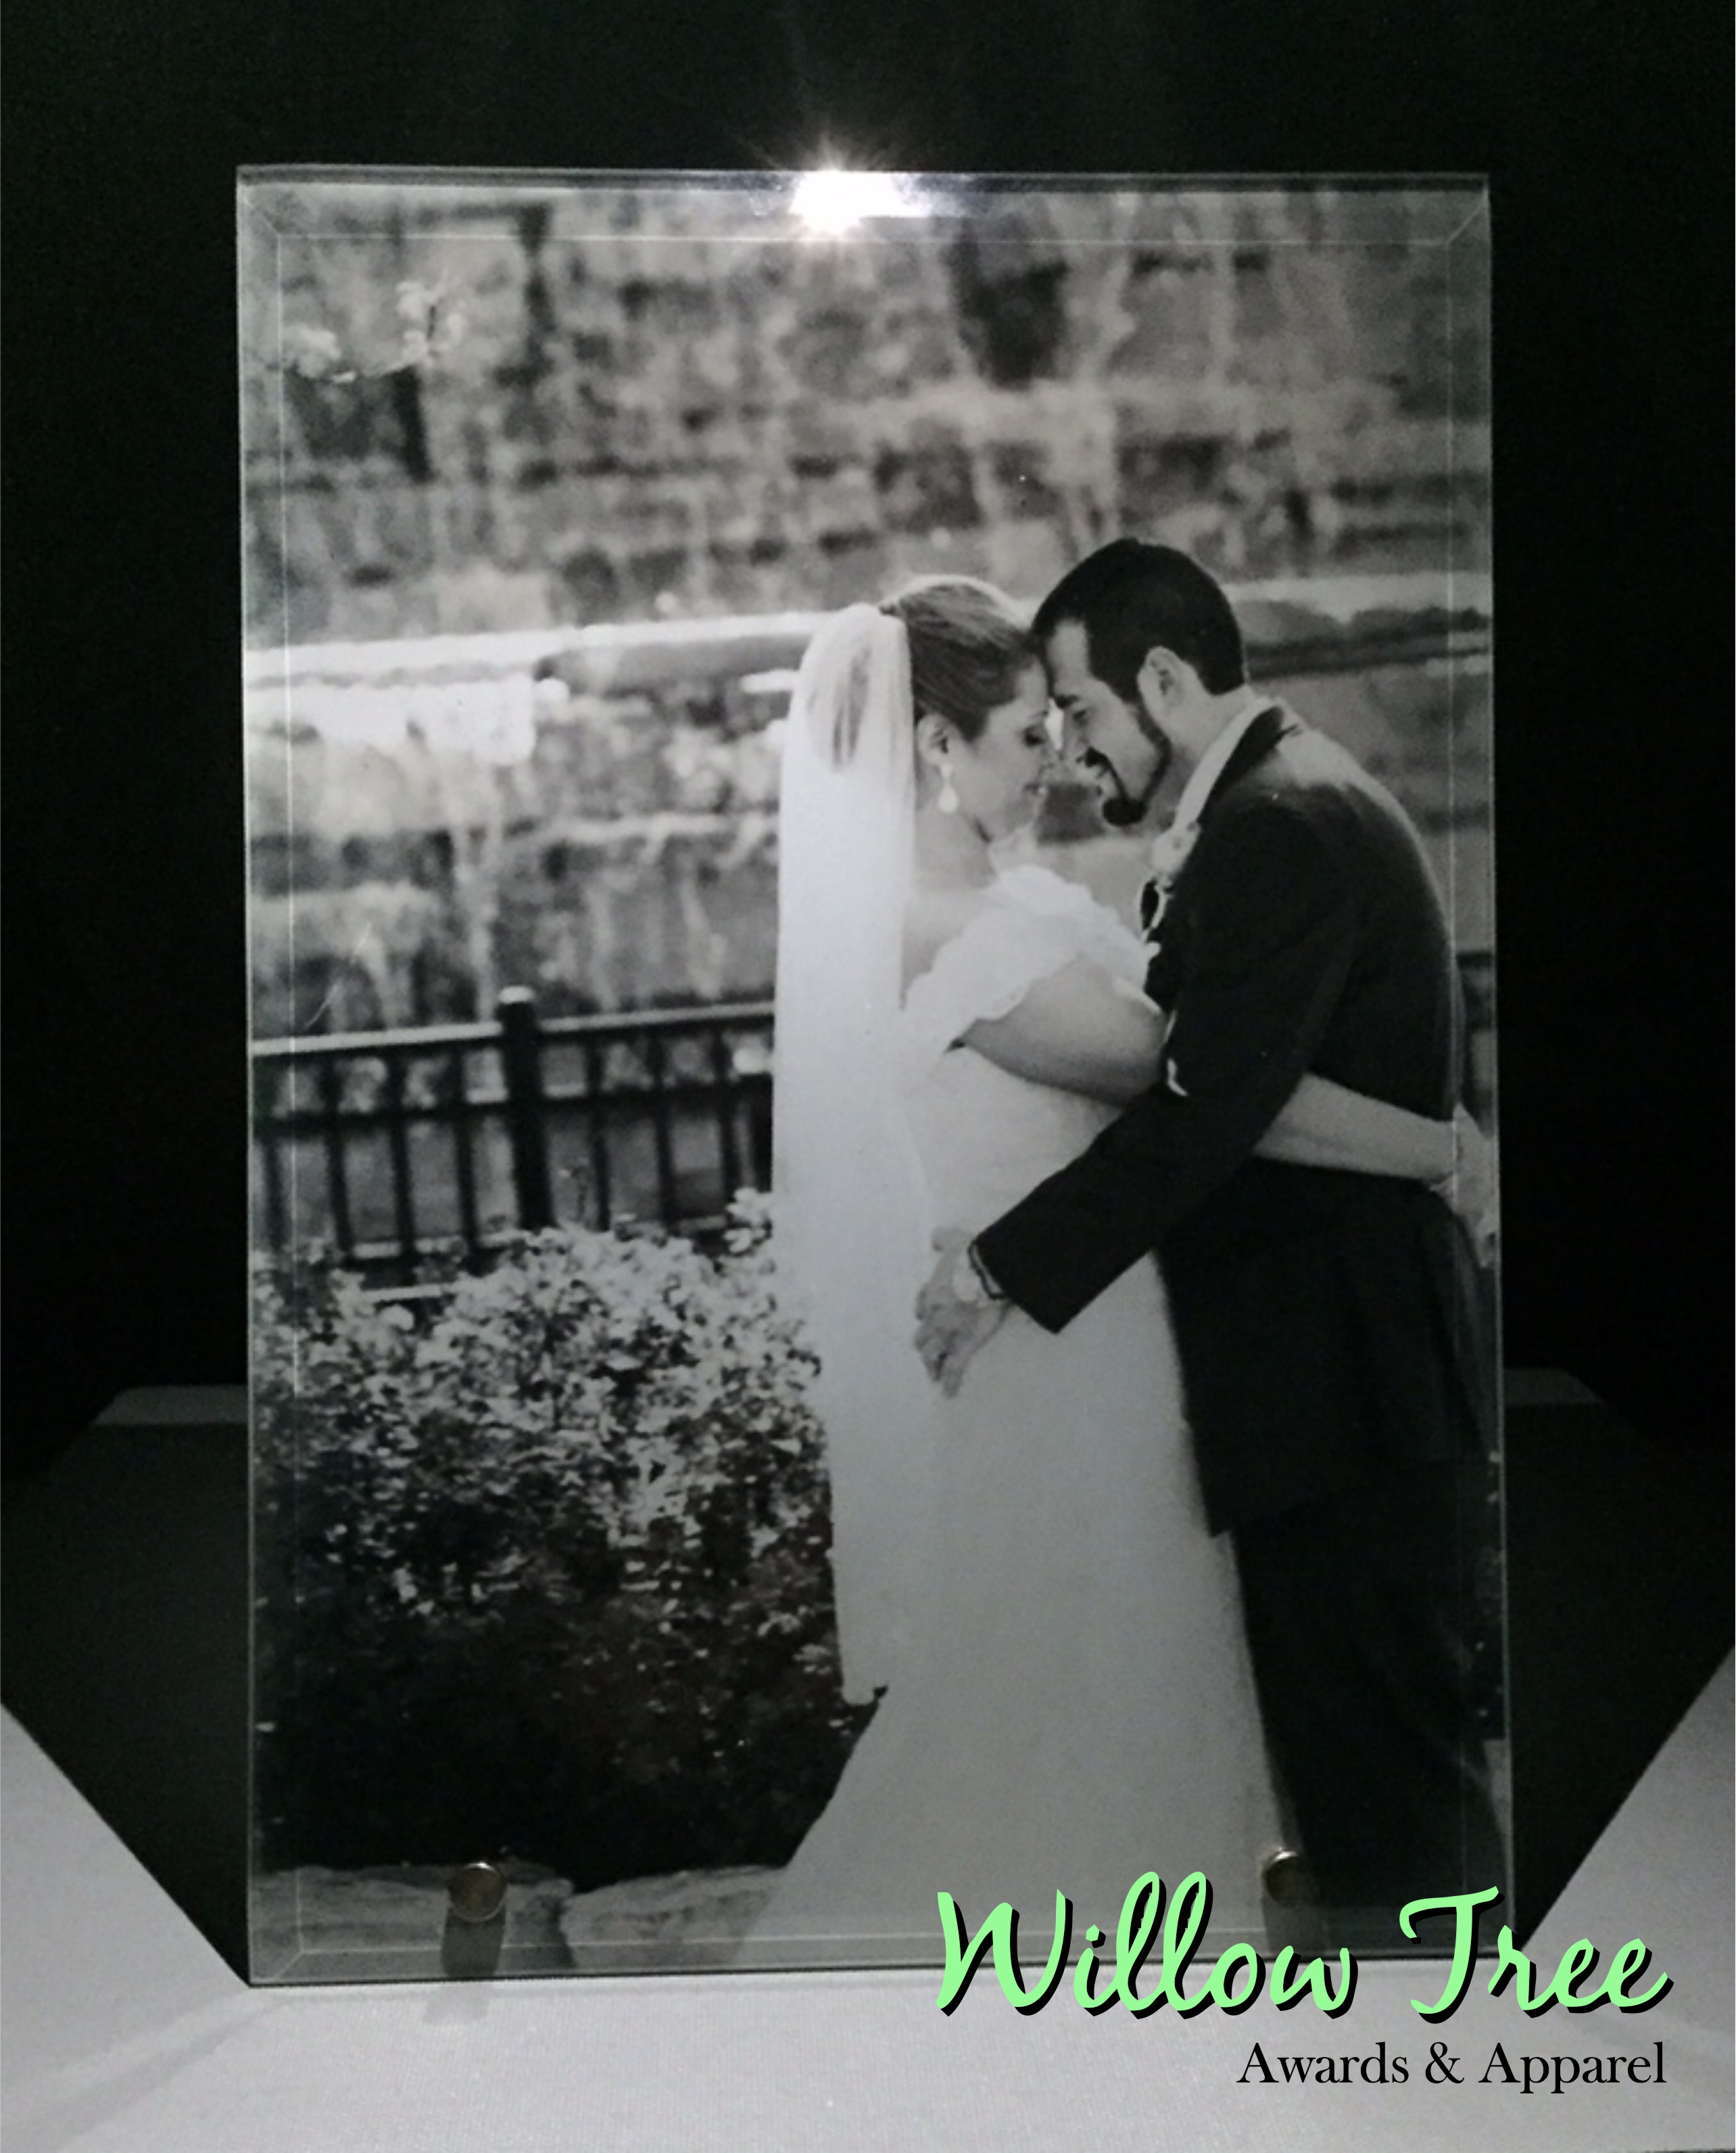 SubliGlass Wedding Photo made with sublimation printing